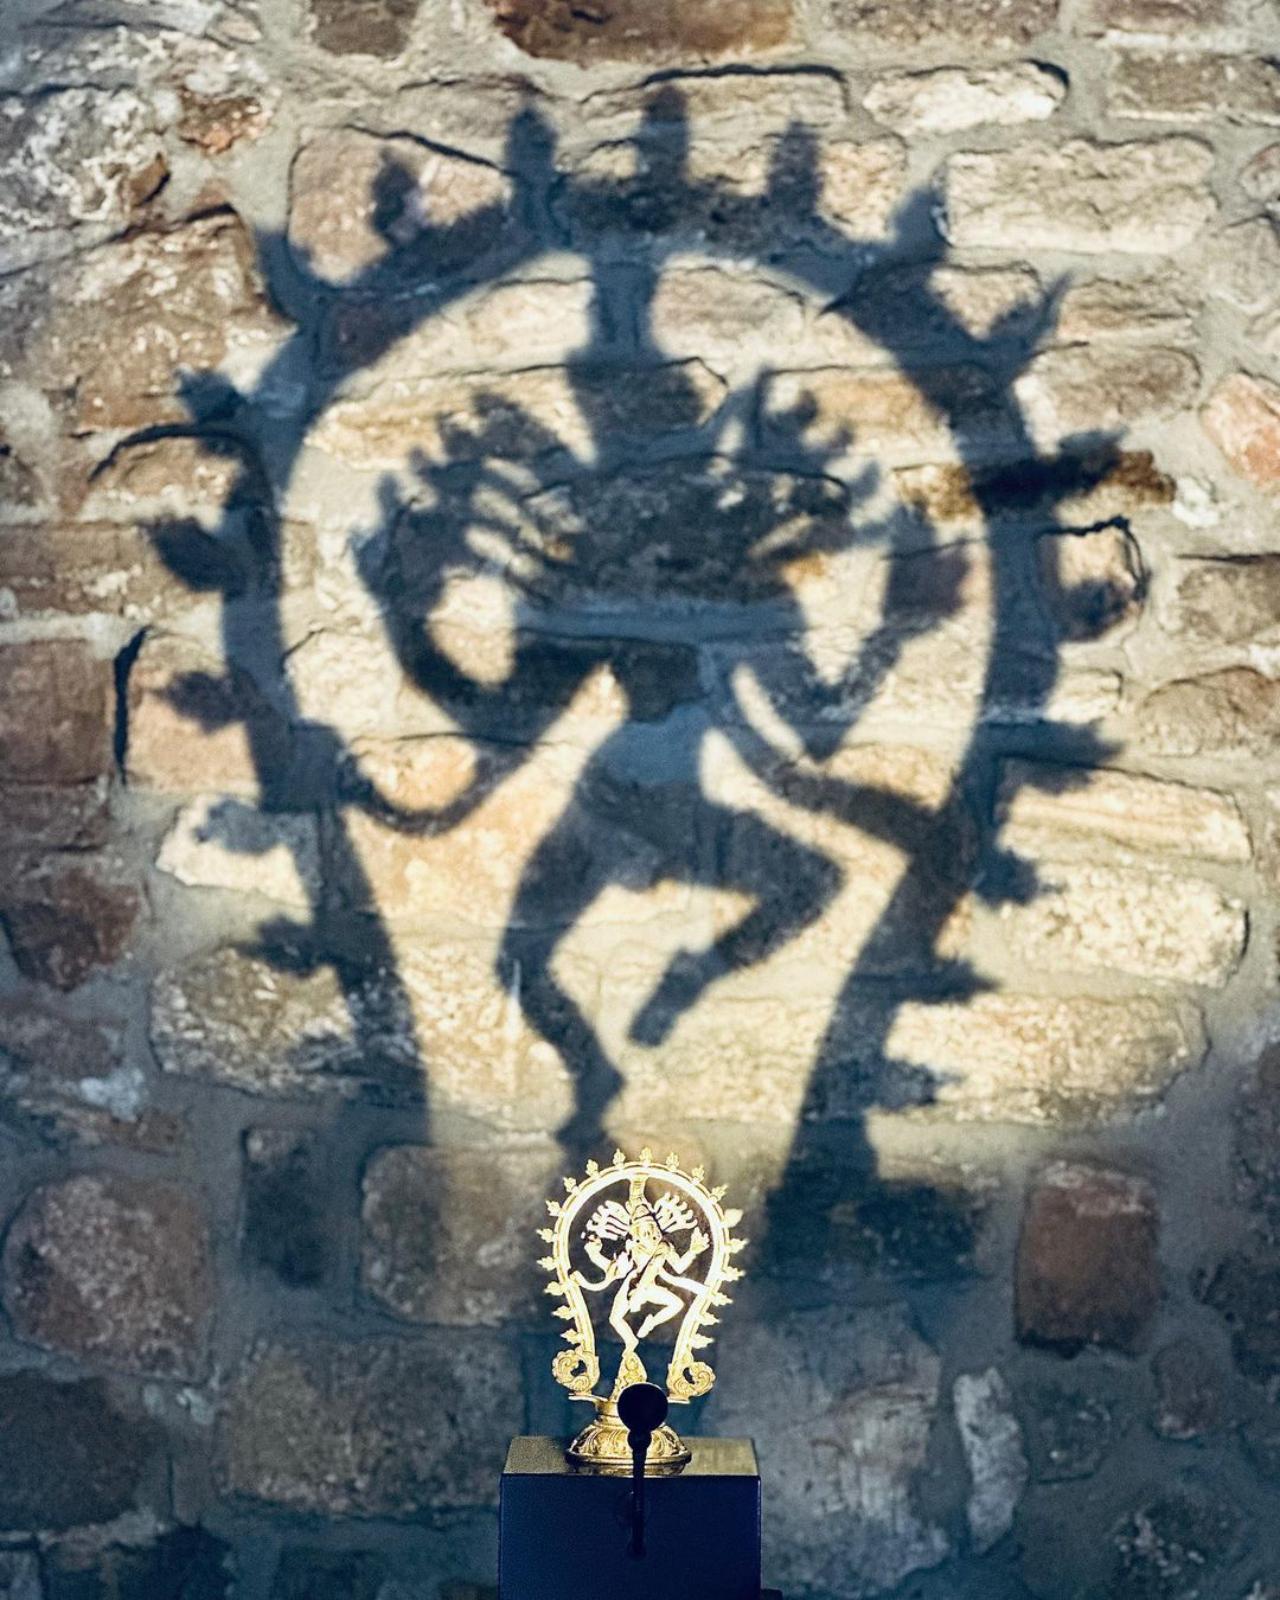 The trip also included a few spiritual pitstops. Malaika captured a beautiful photo of a Nataraja statue, with its shadow embossed on the stone behind it. Absolutely regal!